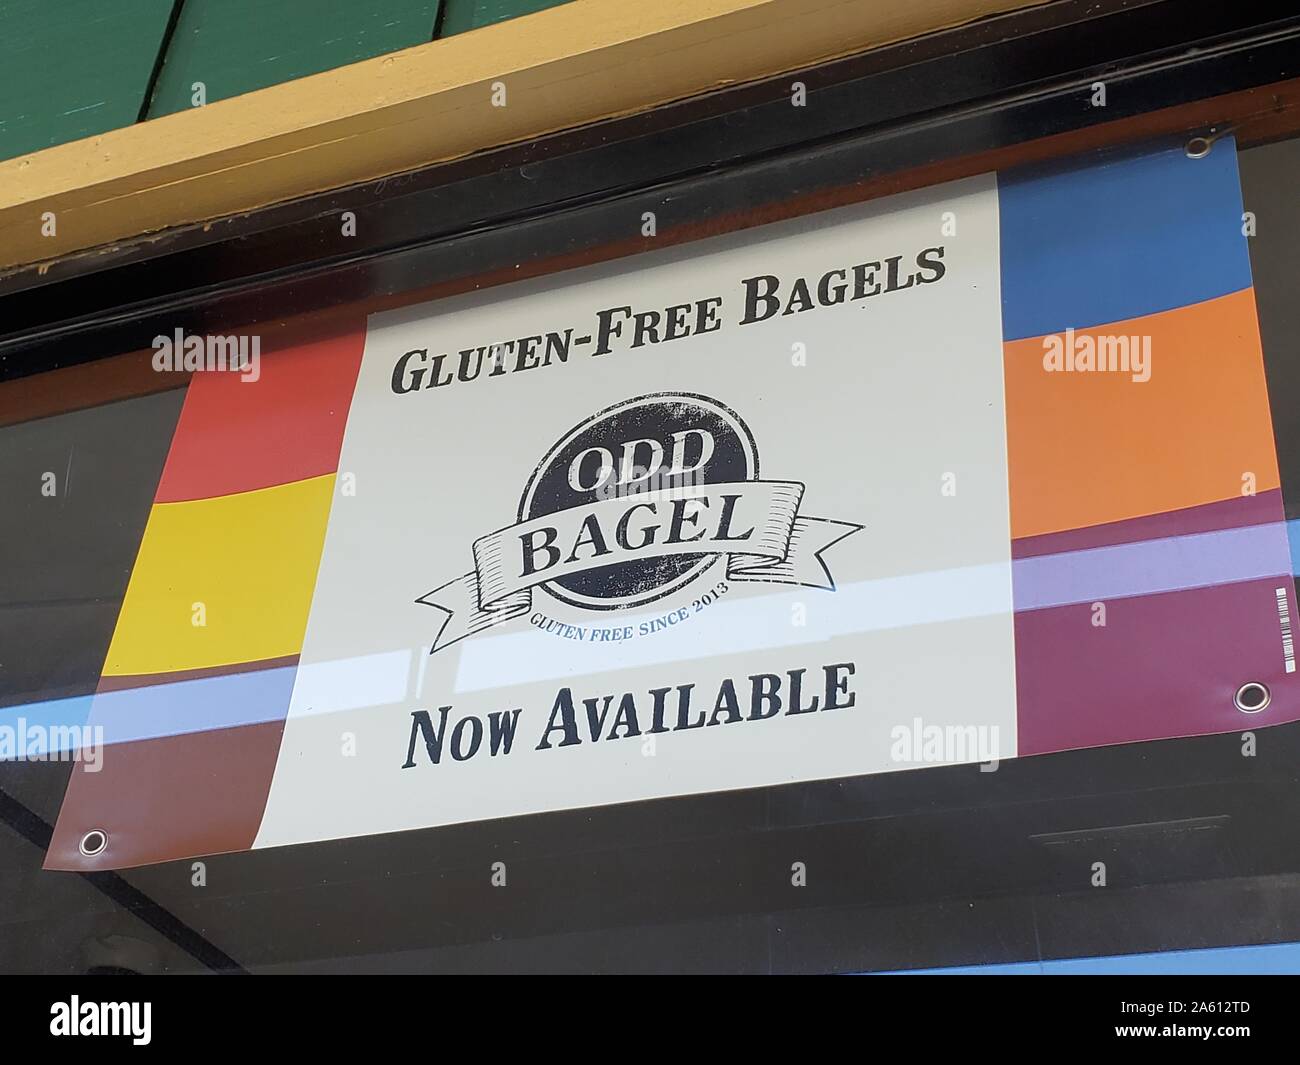 Sign advertising gluten free bagels from Odd Bagel, part of a trends towards gluten-free eating in the San Francisco Bay Area, Walnut Creek, California, September 27, 2019. () Stock Photo